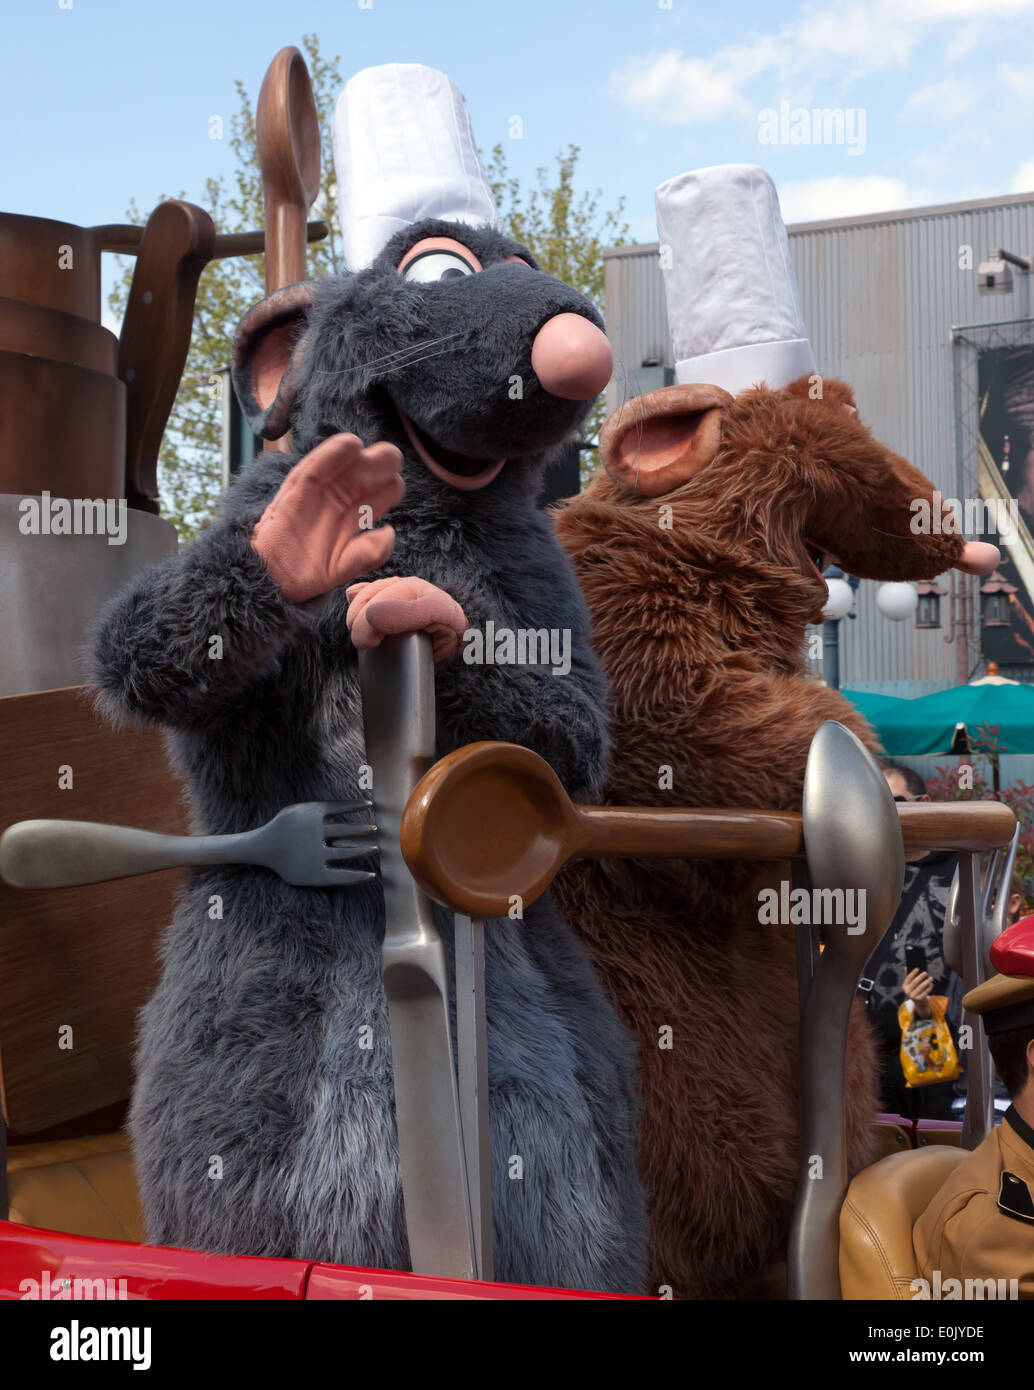 Close-up image of Rémy and Emile, from the Disney film Ratatouille, in the Stars 'n' Cars, Parade, Walt Disney Studios, Paris. Stock Photo